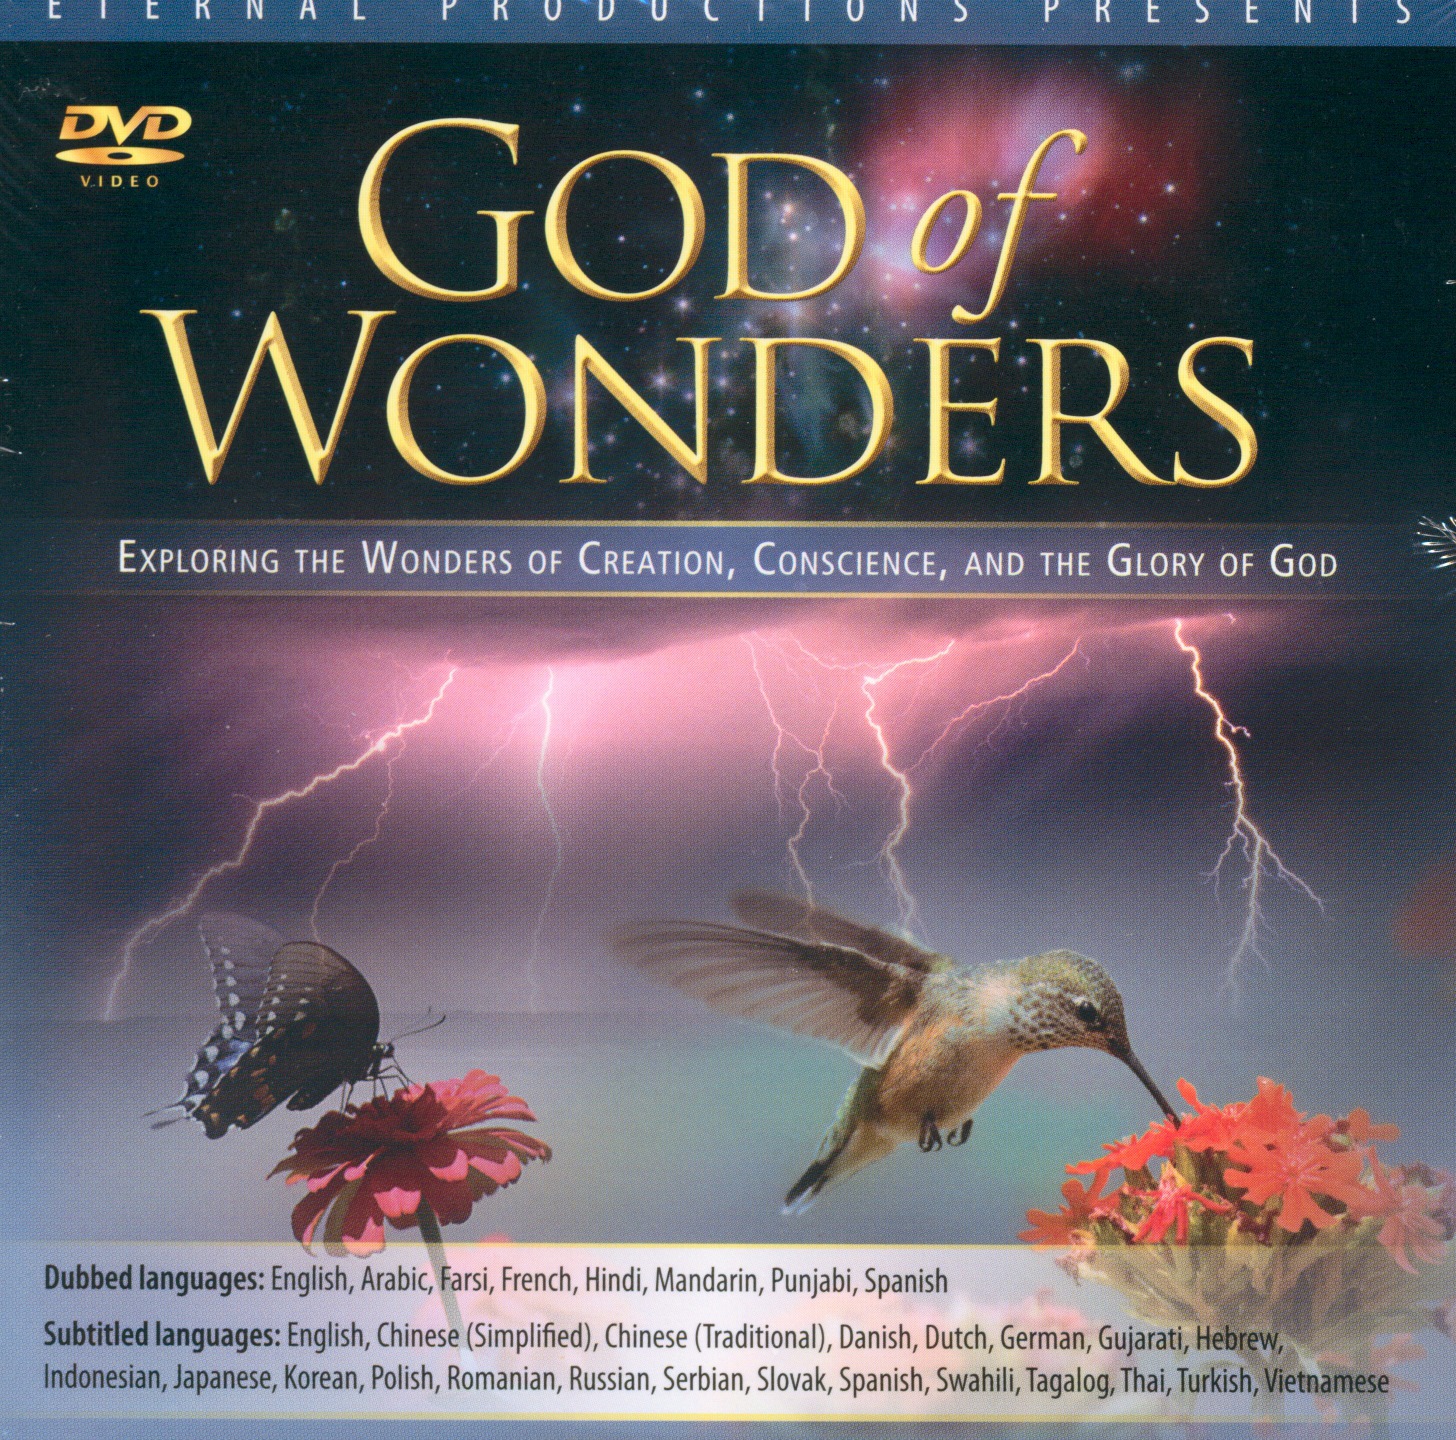 God of wonders DVD - Exploring the Wonders of Creation, Conscience, and the Glory of God